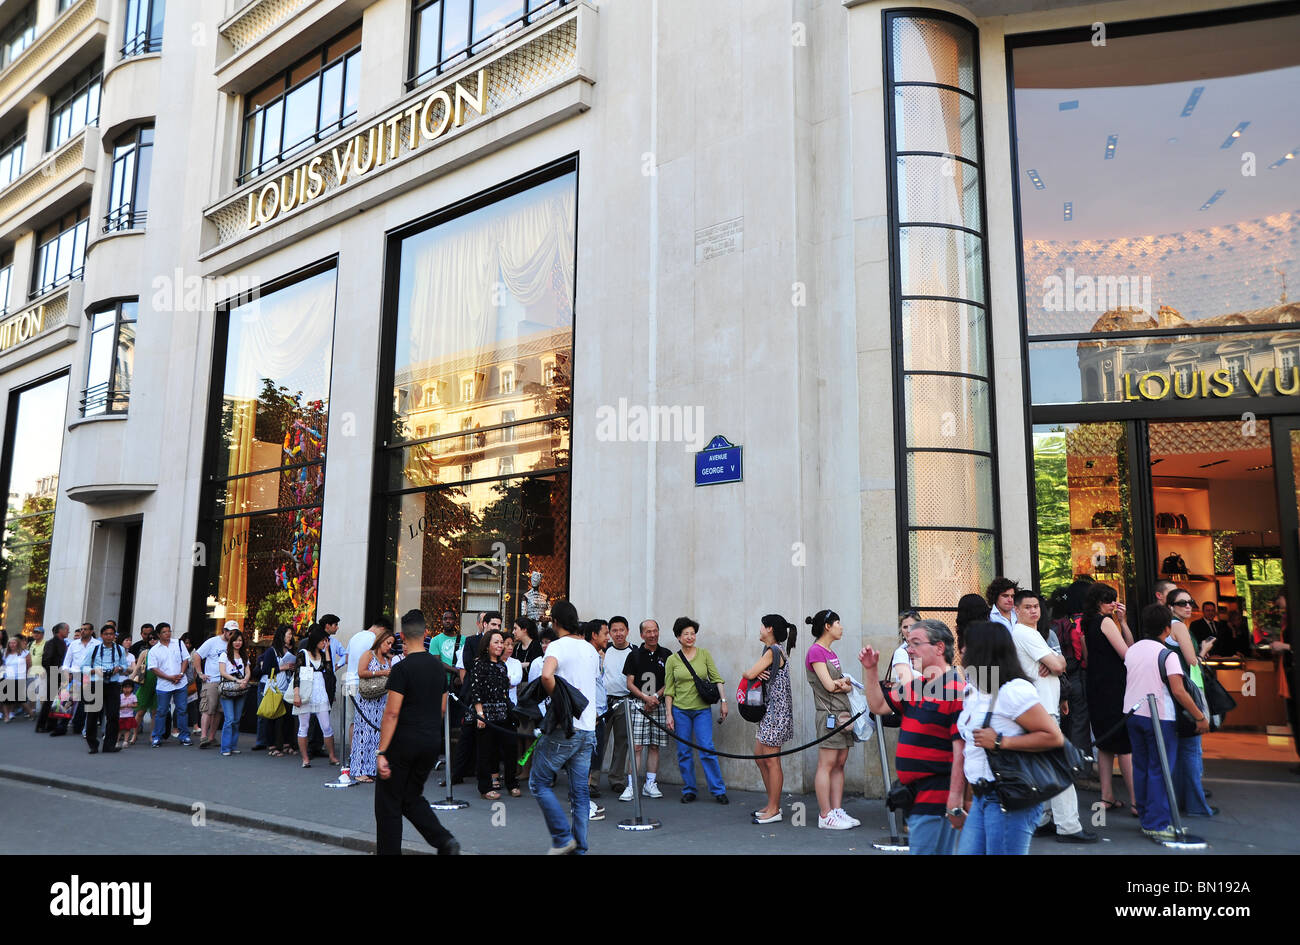 Japanese tourists queuing at Louis Vuitton store in Champs Elysees Stock Photo: 30147218 - Alamy